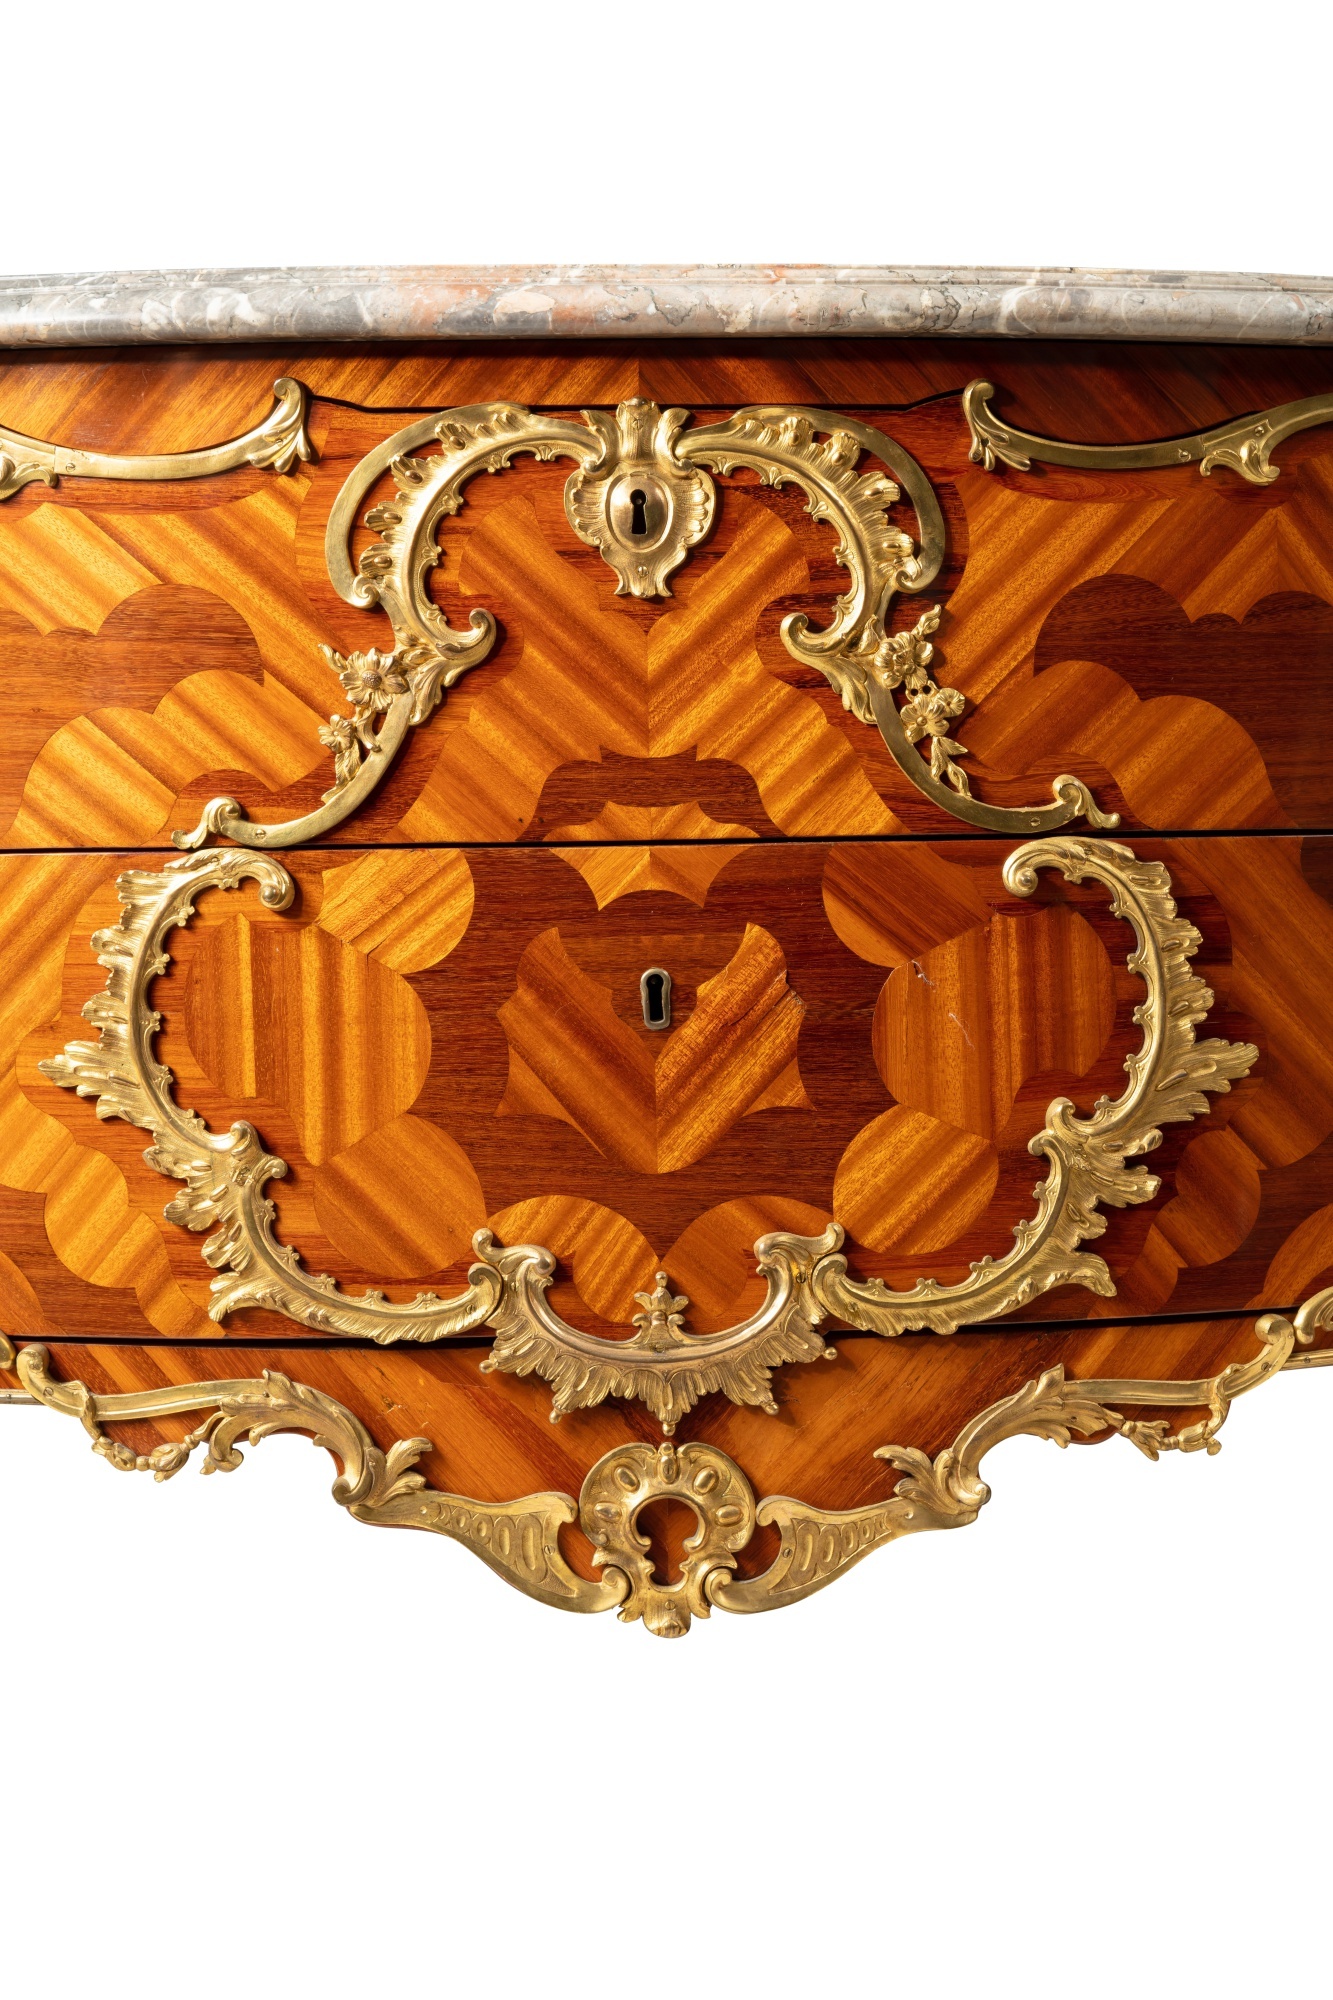 A Louis XV gilt-bronze mounted satinwood and amaranth veneered commode, circa 1750, stamped by BVRB, - Image 4 of 11